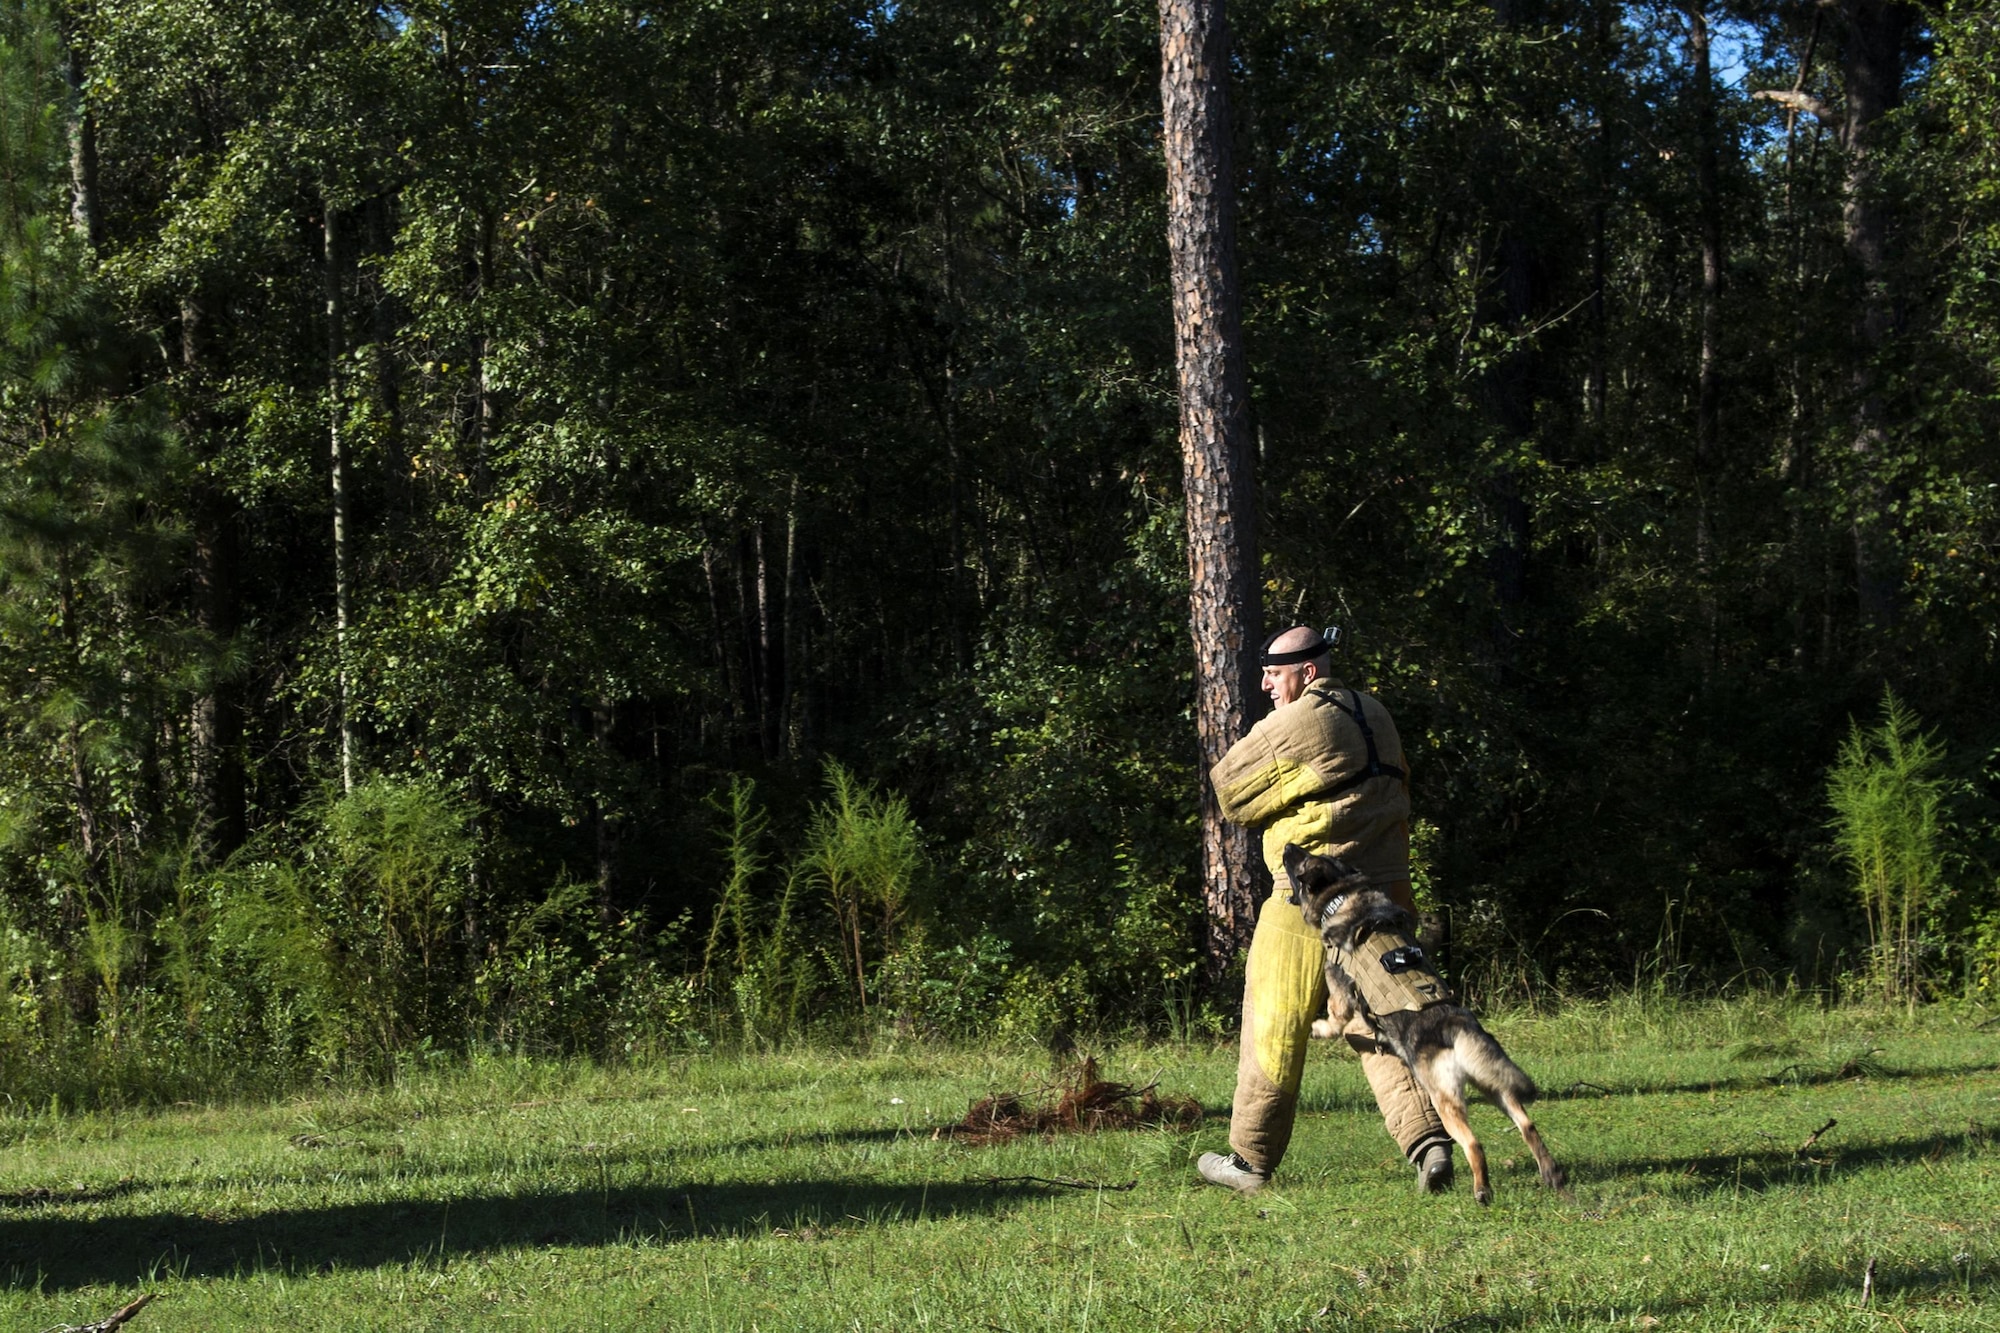 U.S. Air Force Military Working Dog Benga, 23d Security Forces Squadron, jumps at Staff Sgt. Erik Burger, 23d Wing Public Affairs broadcast craftsman, during a bite demonstration, Sept. 6, 2016, at Moody Air Force Base, Ga. Burger acted as a perpetrator during the demonstration and was unsuccessful at escaping Benga’s bite. (U.S. Air Force photo by Airman 1st Class Janiqua P. Robinson)